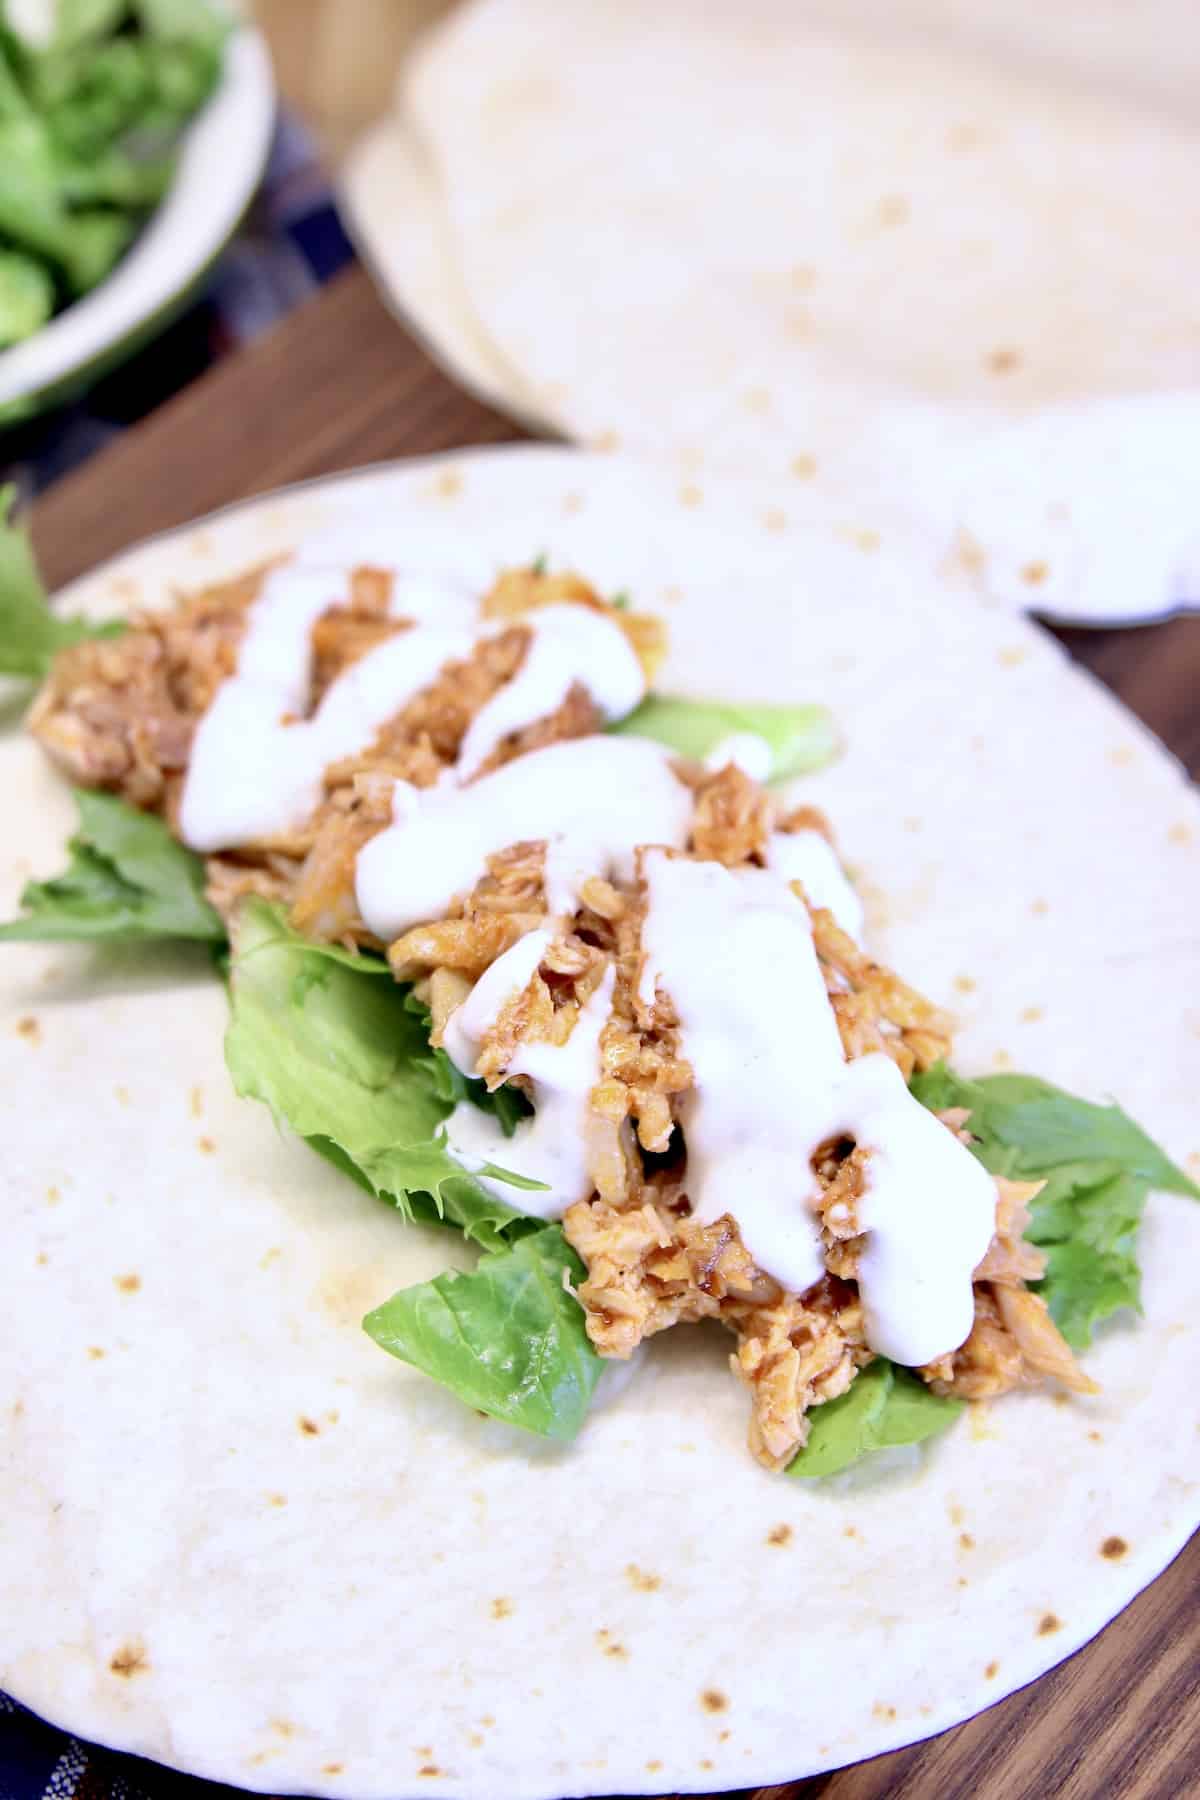 Chicken wrap with lettuce and ranch.